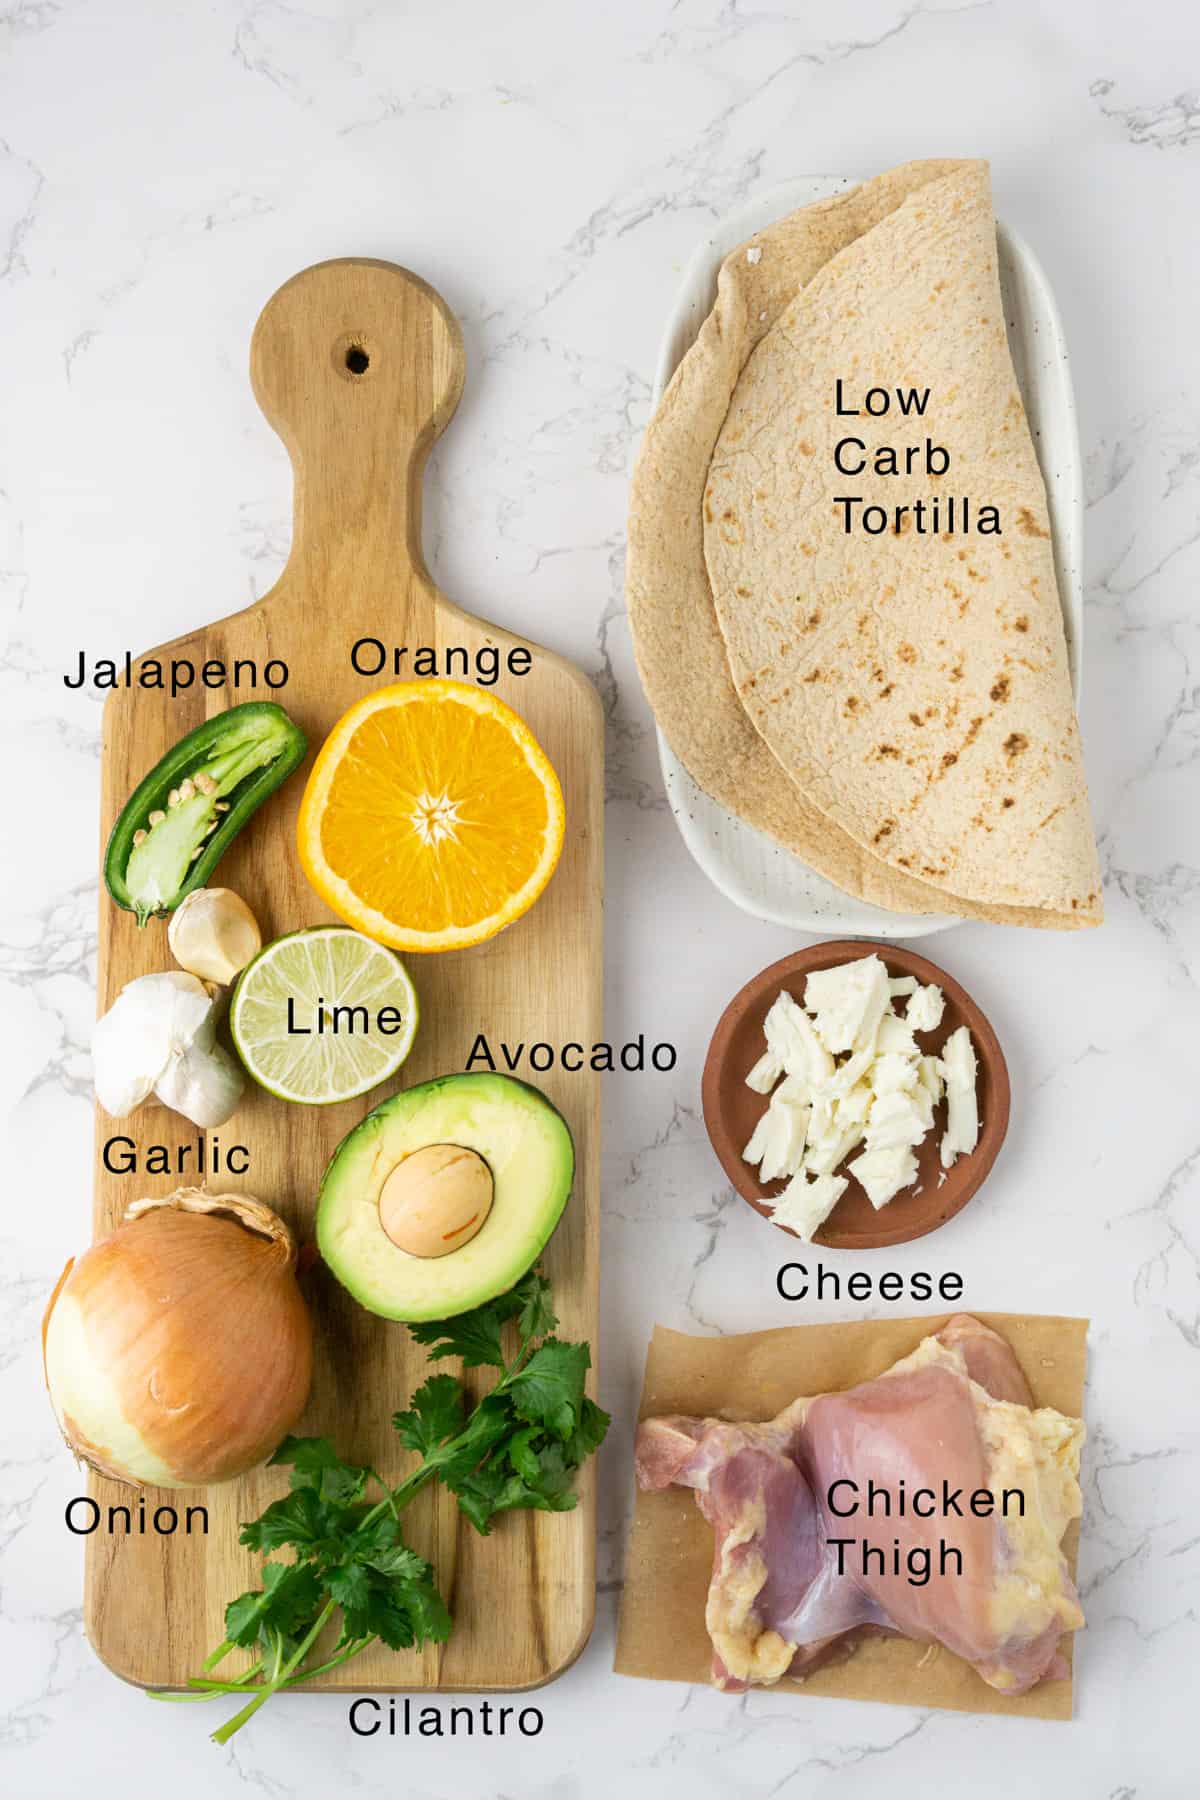 Ingredients for the healthy chicken burrito laid out on the table.